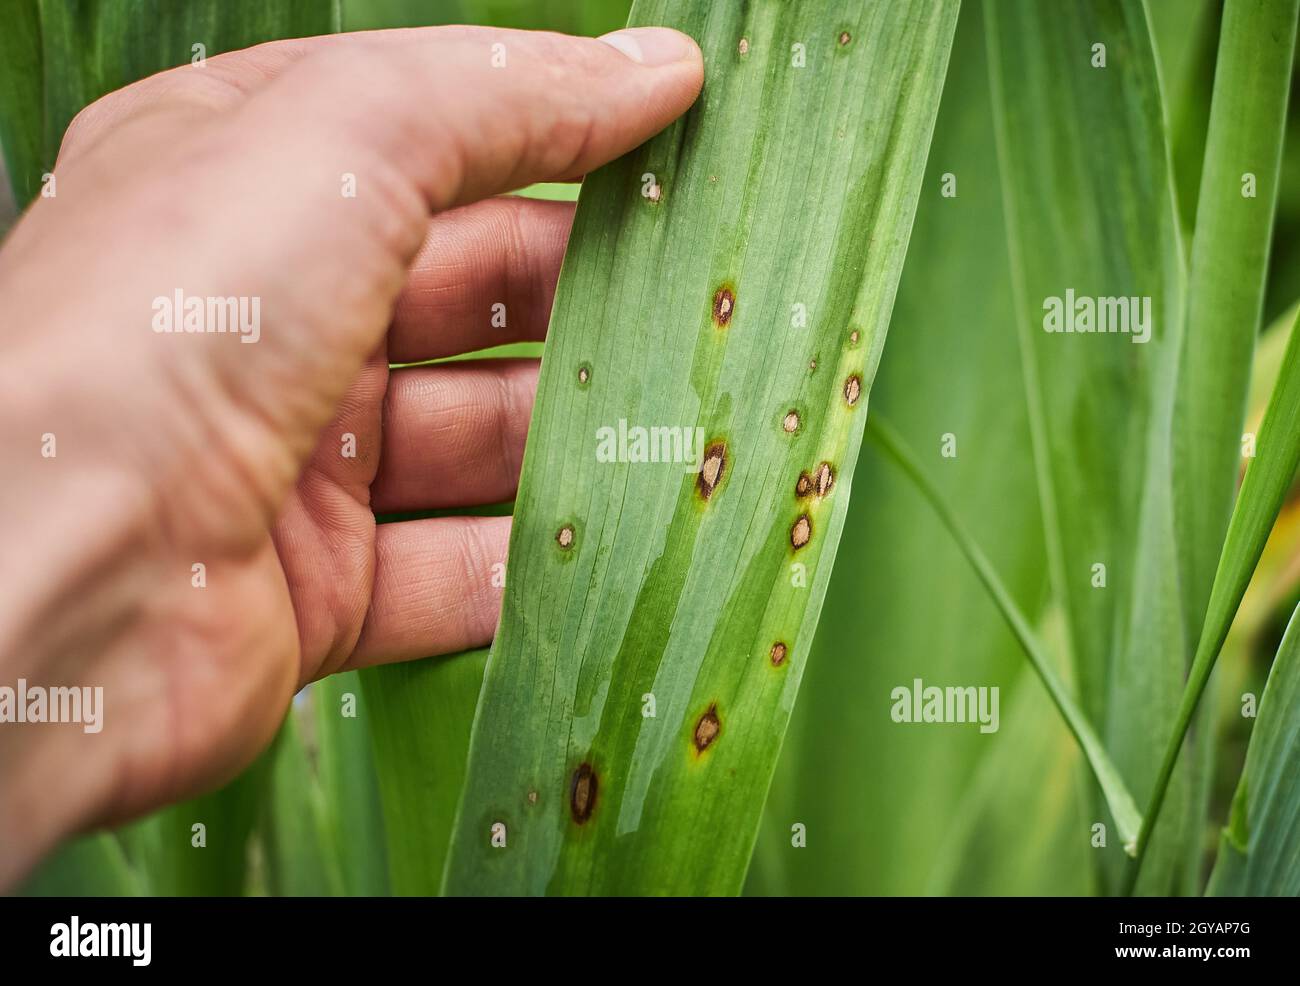 Common Plant Diseases. Fungal spots on leaves. Black spot or blotches on garden plant. Blight infected stems. Canker wounds by bacterial pathogens. Ma Stock Photo